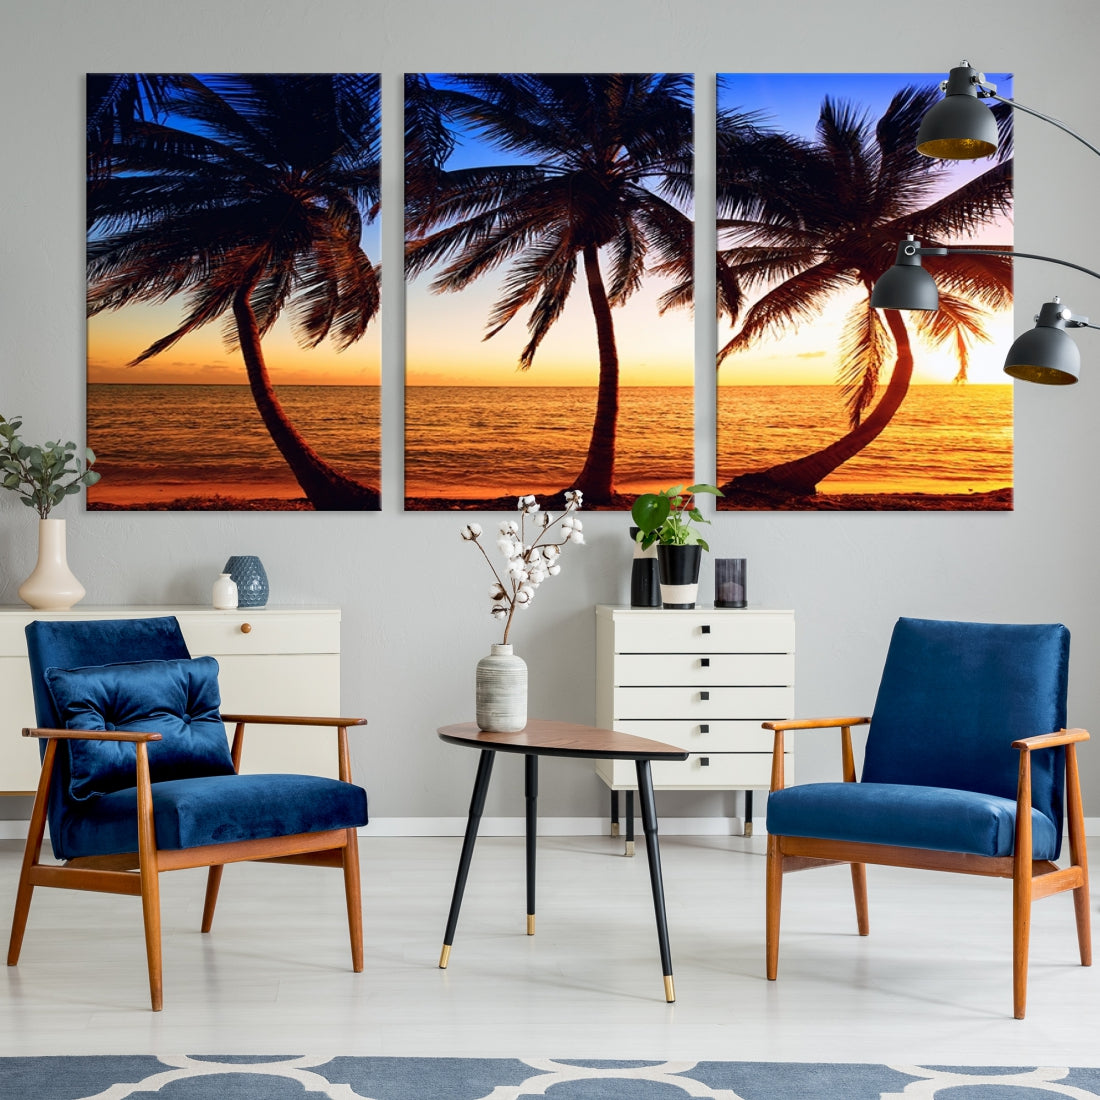 Large Wall Art Canvas Curve Palms at Sunset on Beach